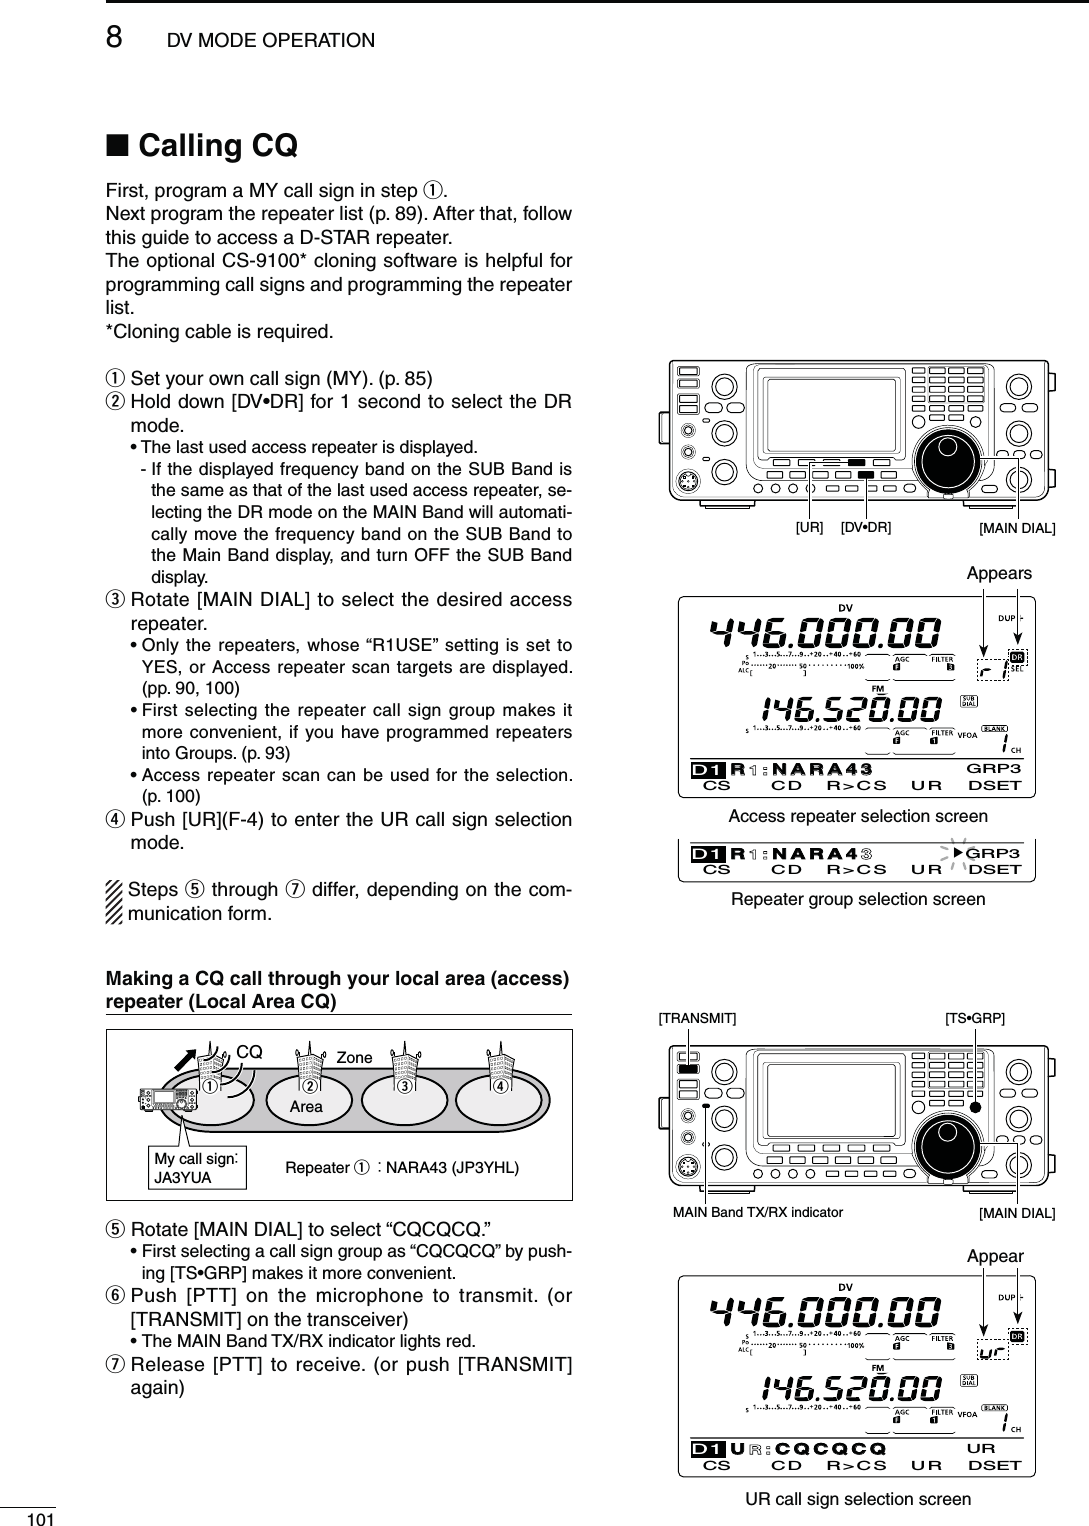 1018DV MODE OPERATIONN#ALLING#1&amp;IRSTPROGRAMA-9CALLSIGNINSTEPq.Next program the repeater list (p. 89). After that, follow this guide to access a D-STAR repeater.The optional CS-9100* cloning software is helpful for programming call signs and programming the repeater list.*Cloning cable is required.q3ETYOUROWNCALLSIGN-9(p. 85)w  Hold down [DVsDR] for 1 second to select the DR mode.sThe last used access repeater is displayed.    -  If the displayed frequency band on the SUB Band is the same as that of the last used access repeater, se-lecting the DR mode on the MAIN Band will automati-cally move the frequency band on the SUB Band to the Main Band display, and turn OFF the SUB Band display.e  Rotate [MAIN DIAL] to select the desired access repeater. s/NLYTHEREPEATERS, whose “R1USE” setting is set to 9%3OR!CCESSREPEATERSCANTARGETS are displayed. (pp. 90, 100) s&amp;IRSTSELECTINGTHE REPEATERCALLSIGN GROUPMAKESITmore convenient, if you have programmed repeaters into Groups. (p. 93) s!CCESSREPEATERSCANCANBEUSEDFORTHESELECTION (p. 100)r  Push [UR](F-4) to enter the UR call sign selection mode.Steps t through u differ, depending on the com-munication form.CS CD R&gt;CS UR DSETD1GRP3RNARA43CS CD R&gt;CS UR DSETD1URUCQCQCQ[MAIN DIAL][DAccess repeater selection screenUR call sign selection screenRepeater group selection screenAppearsGRP3CS CD R&gt;CS UR DSETD1RNARA4Appear[TRANSMIT] [[MAIN DIAL]MAIN Band TX/RX indicator-AKINGA#1CALLTHROUGHYOURLOCALAREAACCESSREPEATER,OCAL!REA#1My call sign：JA3YUACQAreaZoneRepeater q： NARA43 (JP3YHL)q w e rt Rotate [MAIN DIAL] to select “CQCQCQ.” s&amp;IRSTSELECTINGACALLSIGNGROUPAS“CQCQCQ” by push-ING;43s&apos;20=MAKESITMORECONVENIENTy  Push [PTT] on the microphone to transmit. (or [TRANSMIT] on the transceiver) s4HE-!).&quot;AND4828INDICATORLIGHTSREDu  Release [PTT] to receive. (or push [TRANSMIT] again)